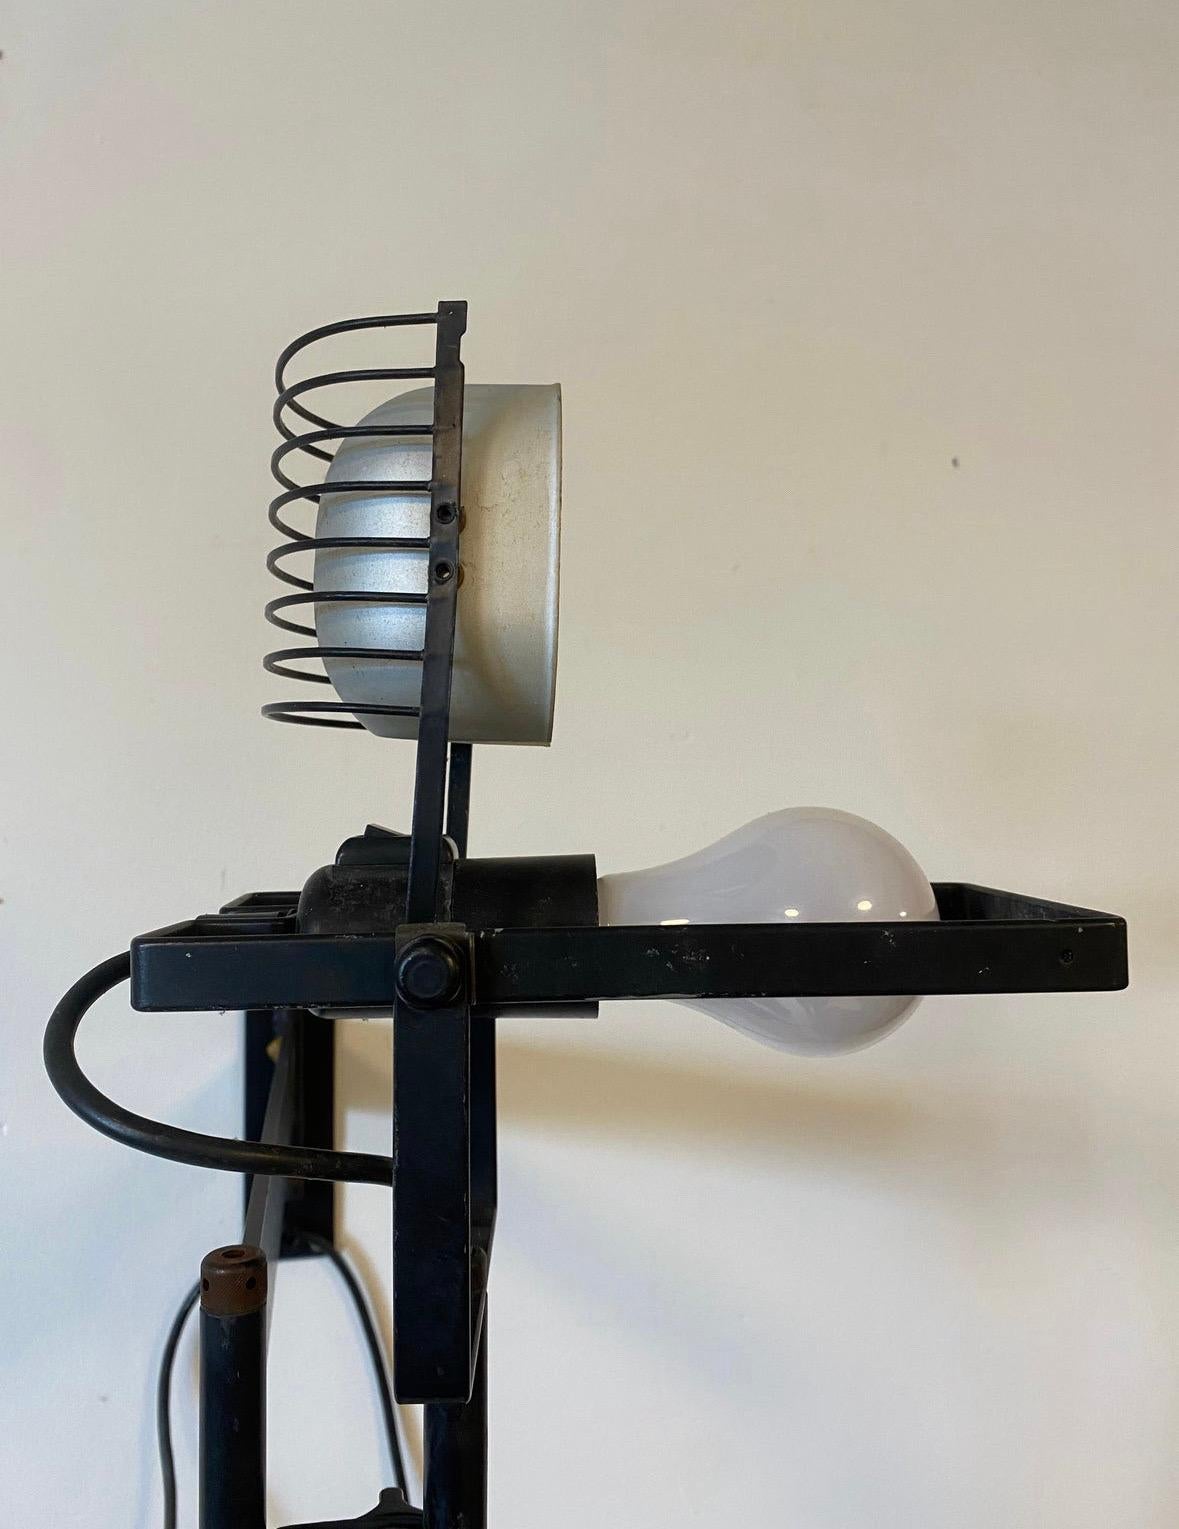 Ernesto Gismondi, founder of Artemide (b 1931-2020)




“An extremely rare architectural wall lamp from the Sintesi range designed by Ernesto Gismondi in 1976. High quality production constructed from coated steel and Aluminium.

Gismondi founded